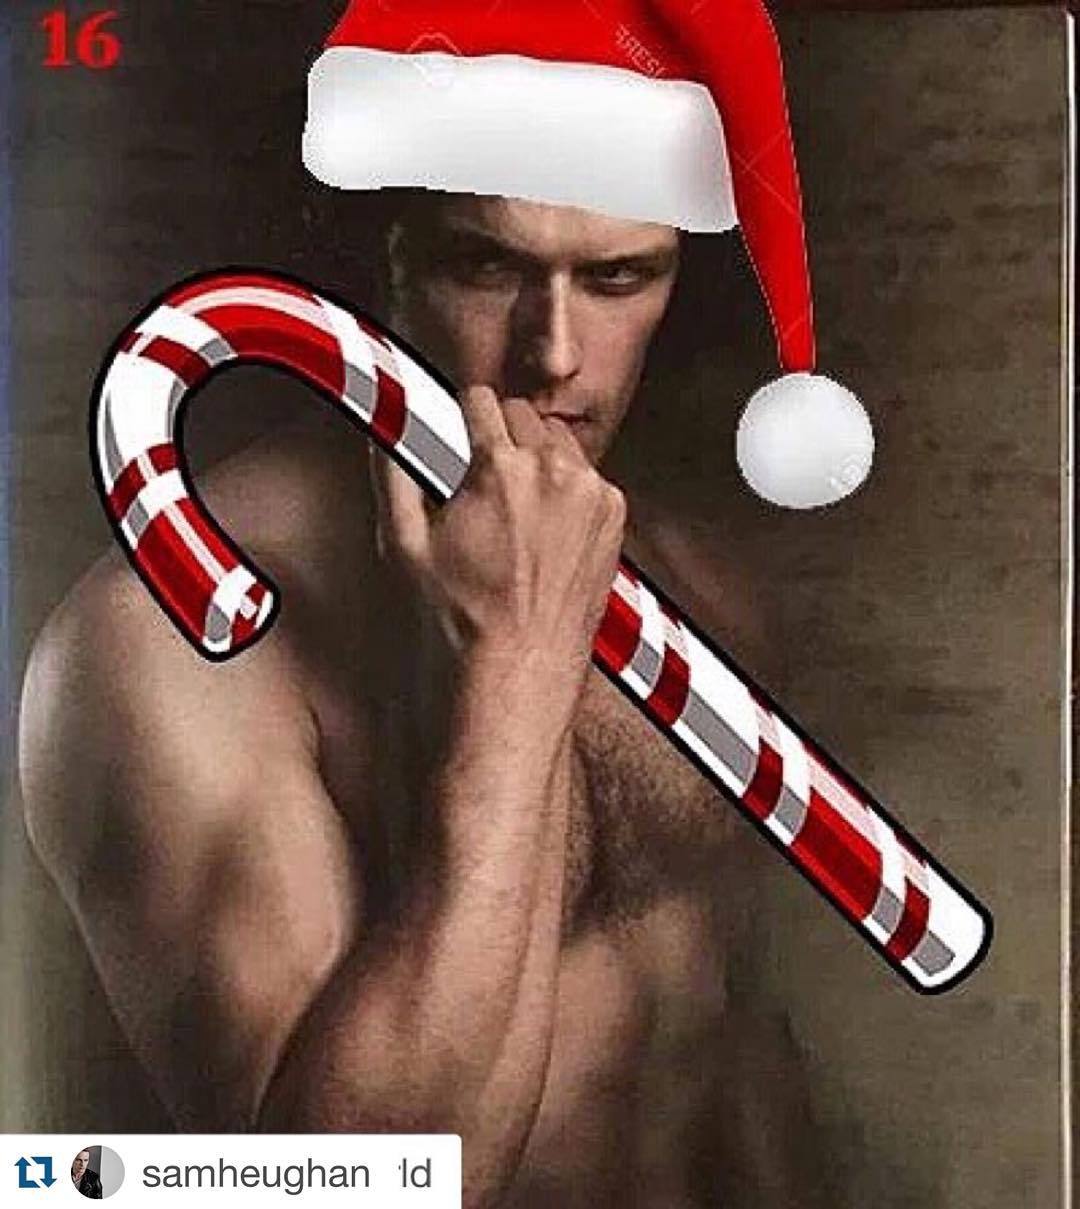 Nothing like a little #JAMMF to keep up my excitement for the holidays.
#outlander #jamiefraser #ginger
#Repost @samheughan with @repostapp.
・・・
Haha love this thanks guys!
And merry Xmas!